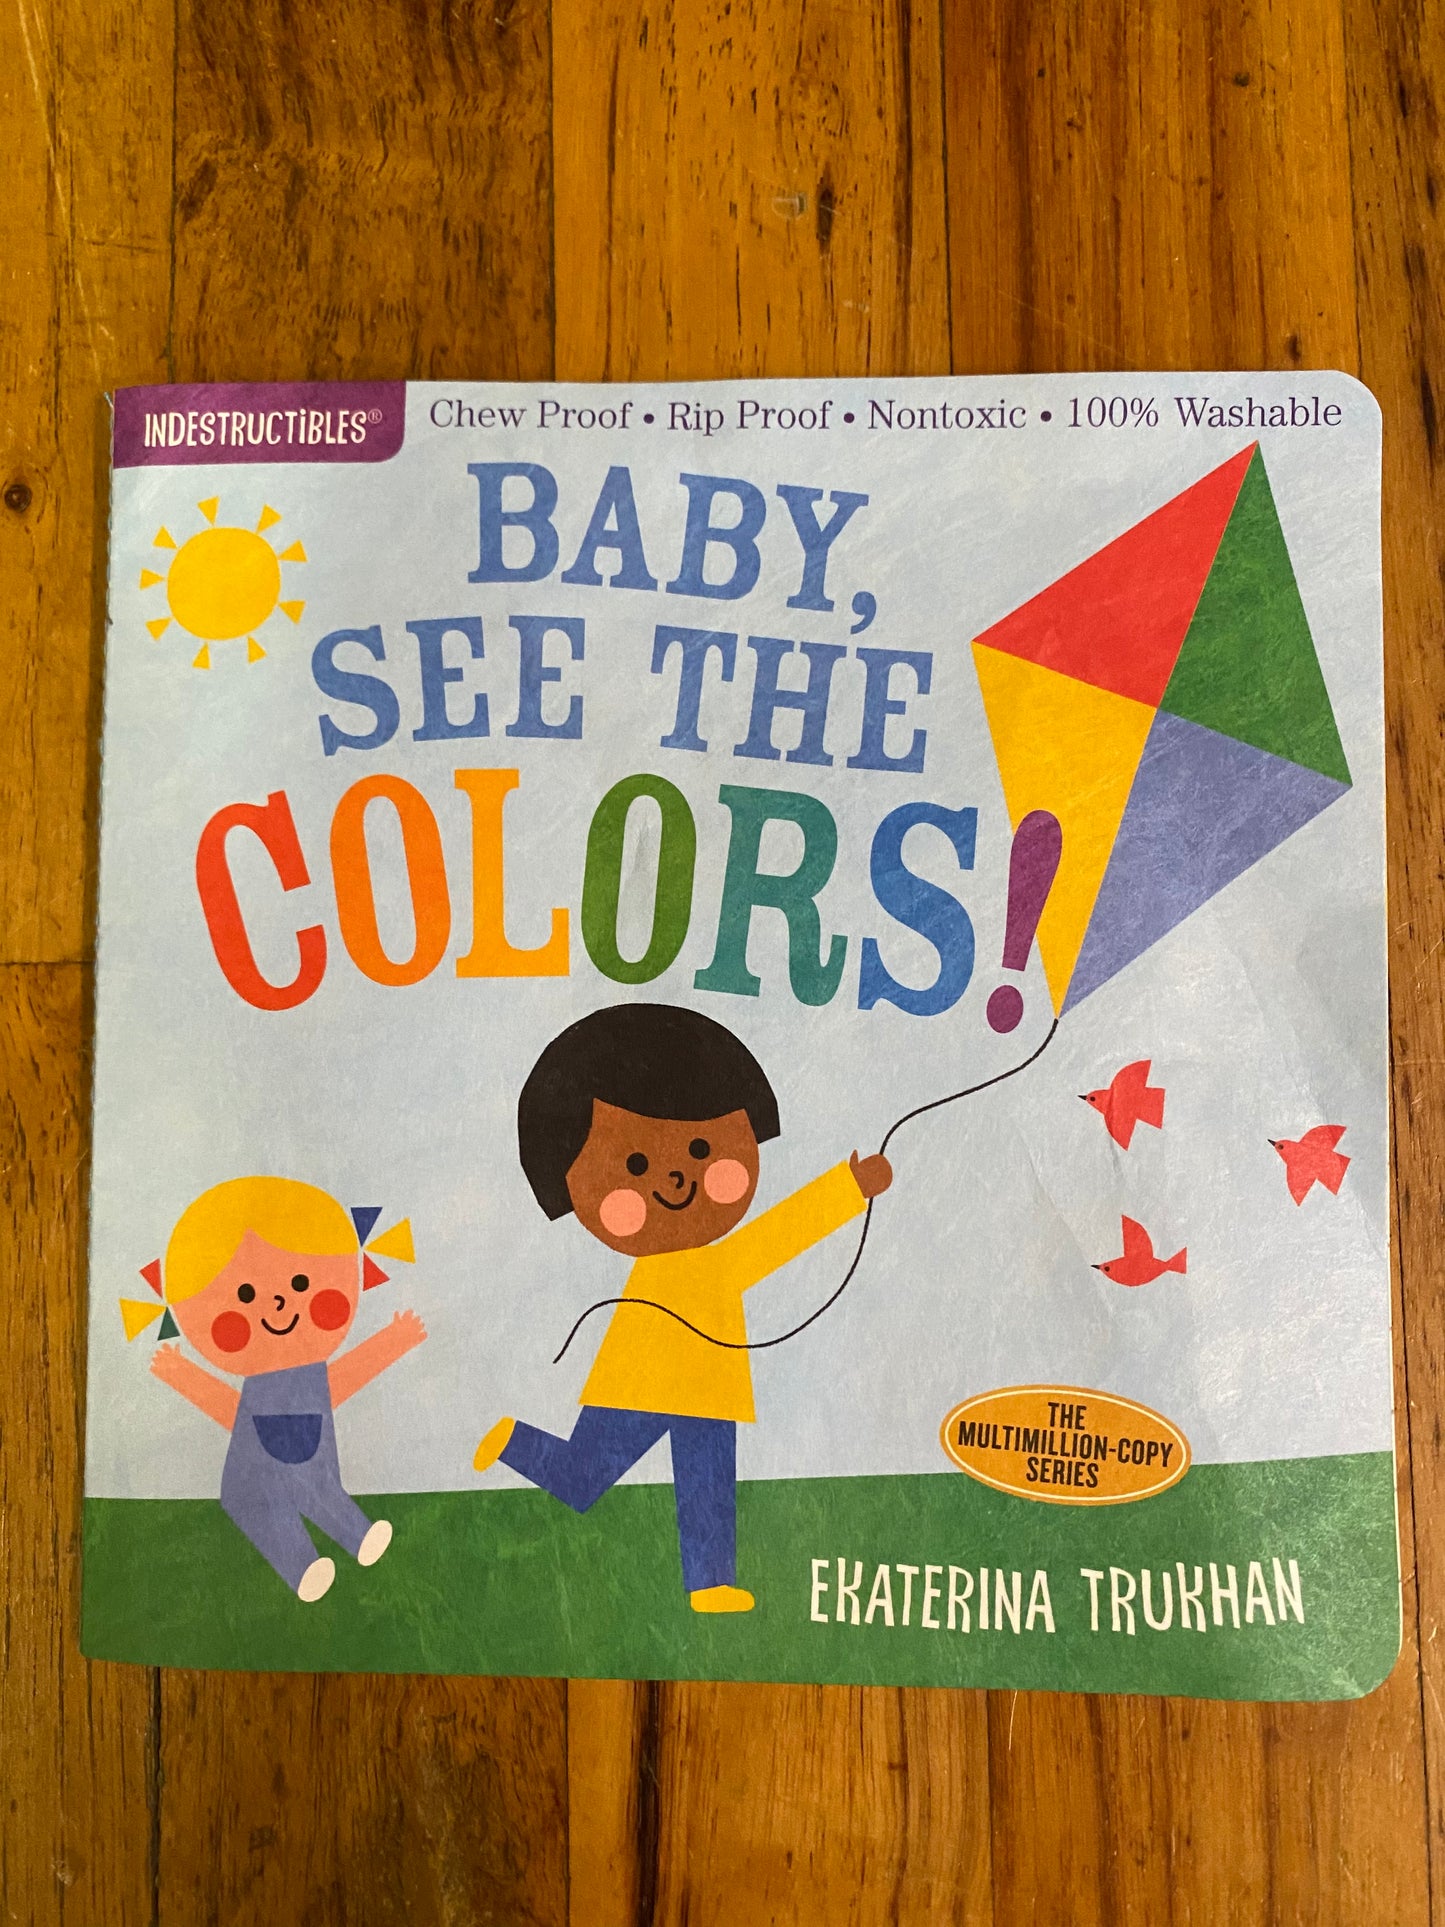 INDESTRUCTIBLES CHILDREN BOOK/BABY SEE THE COLORS